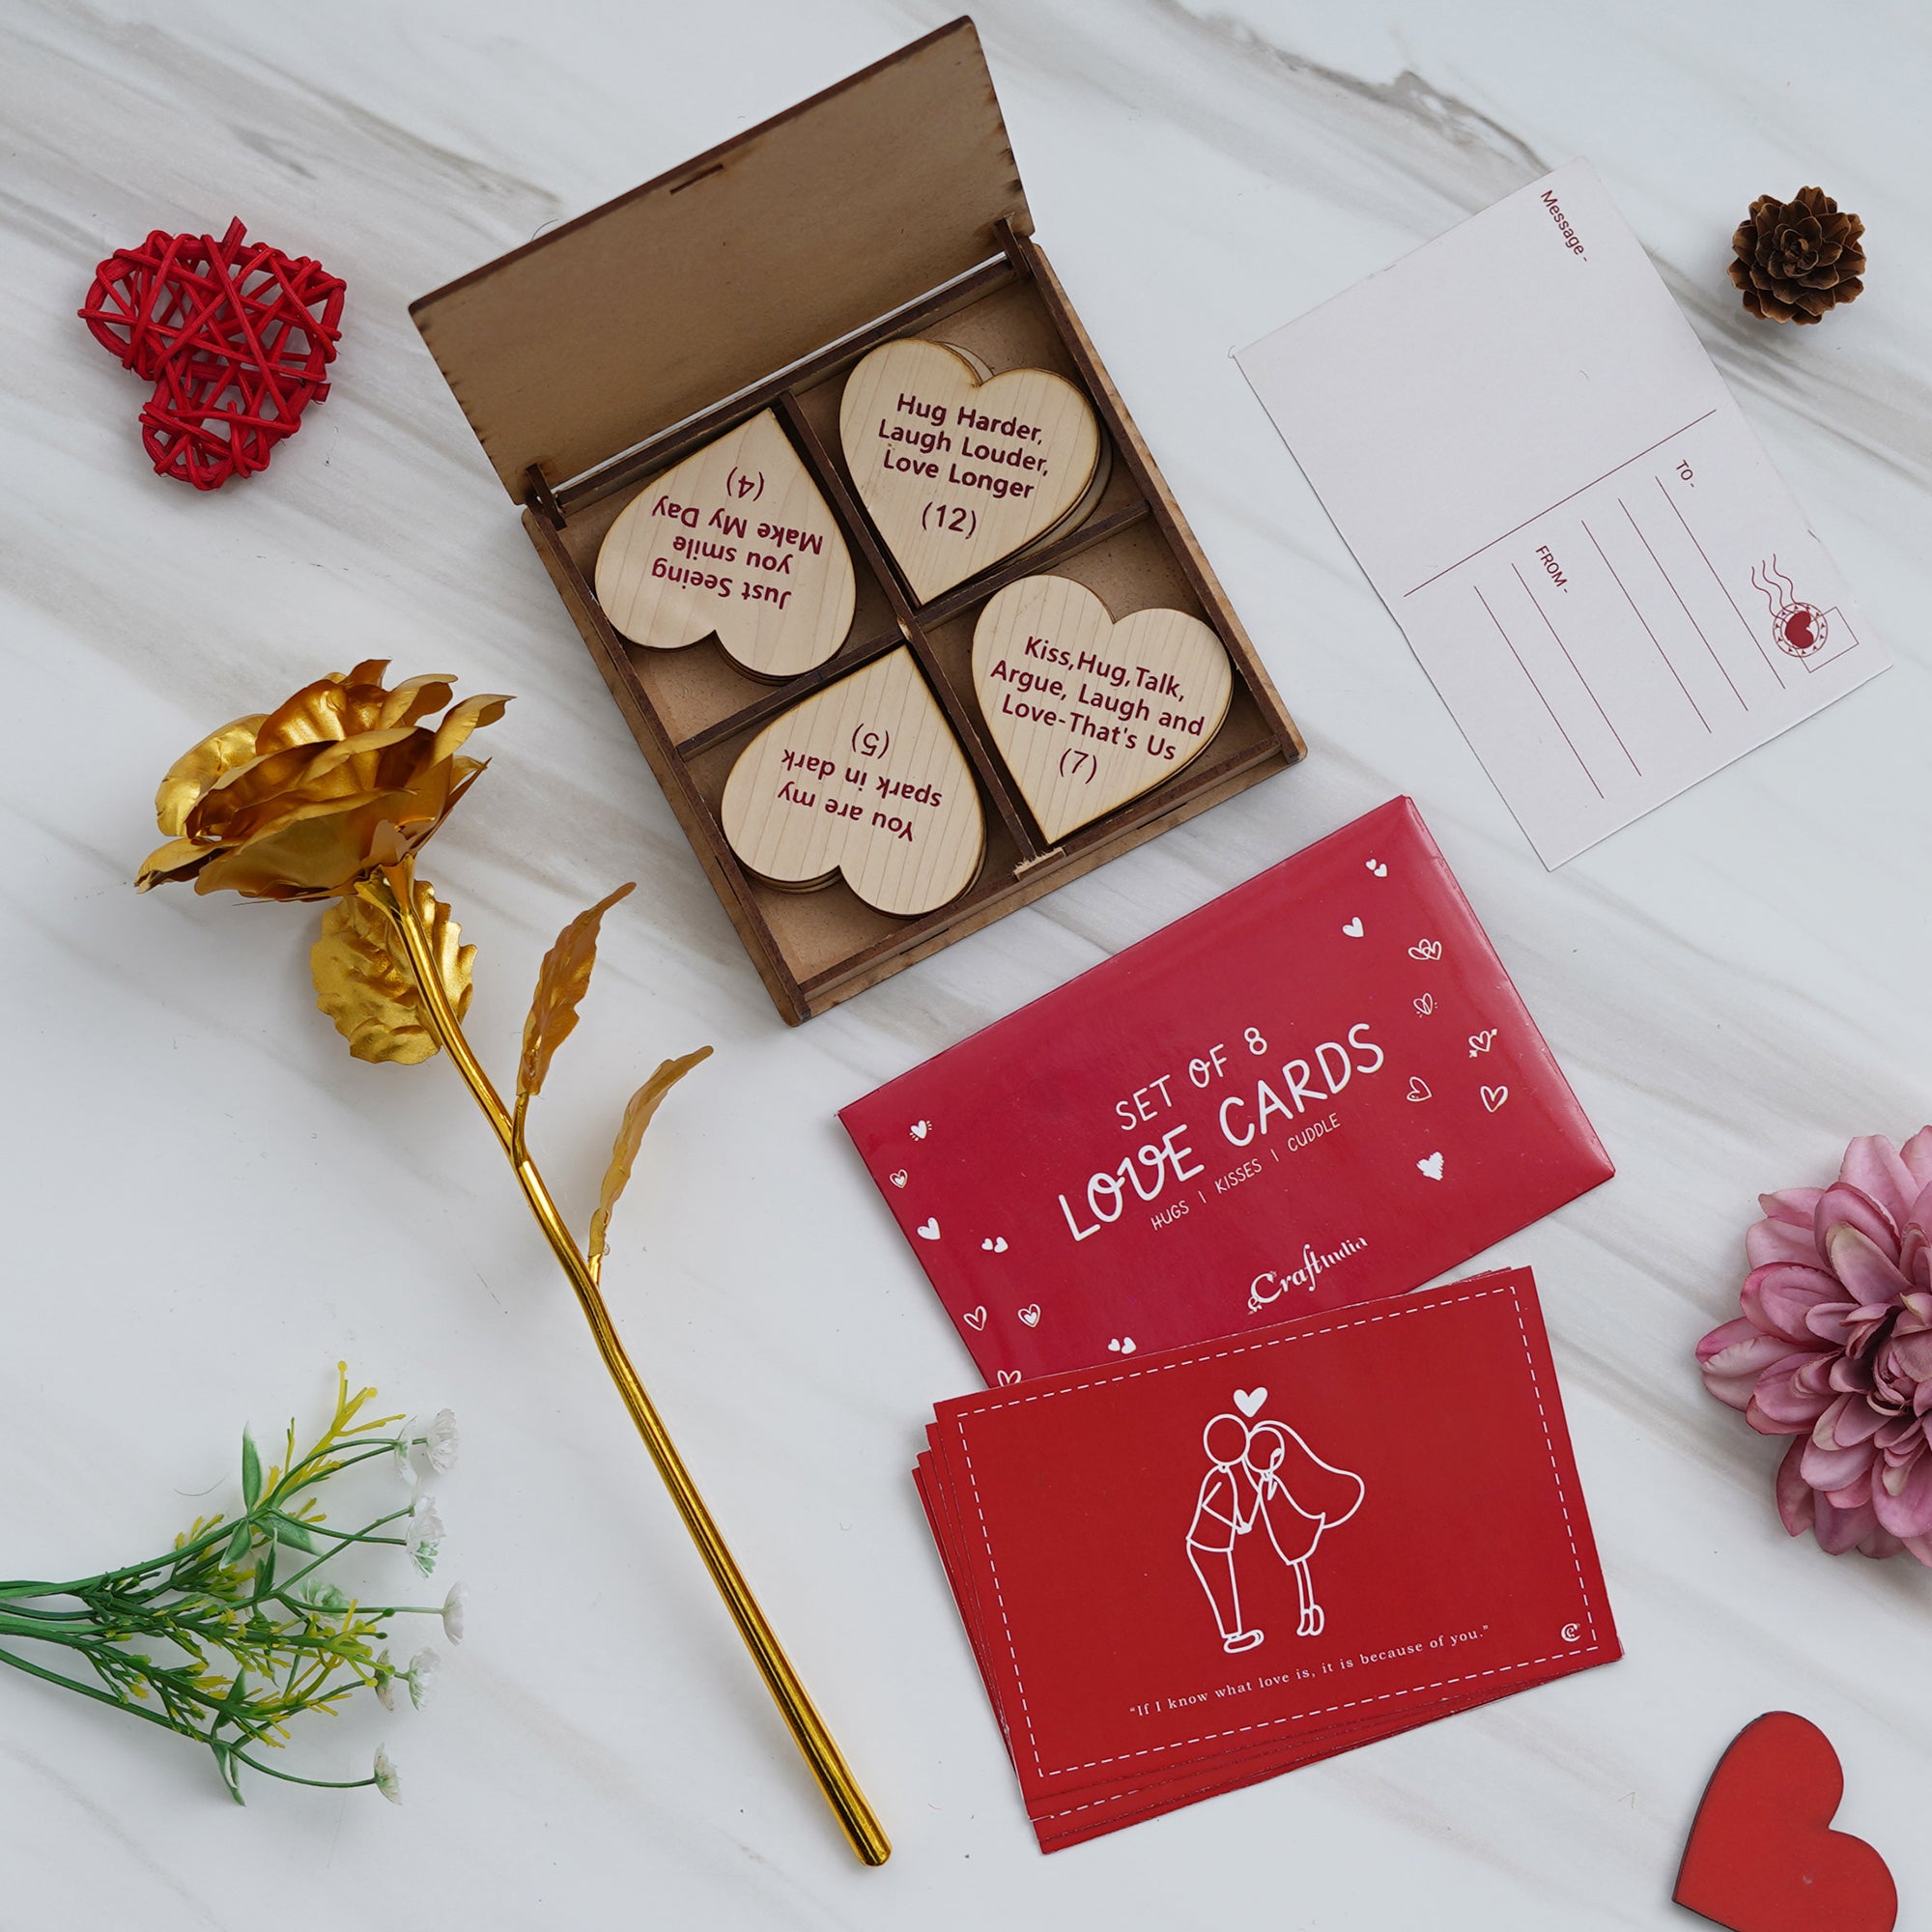 Valentine Combo of Pack of 8 Love Gift Cards, Golden Rose Gift Set, "20 Reasons Why I Love You" Printed on Little Hearts Wooden Gift Set